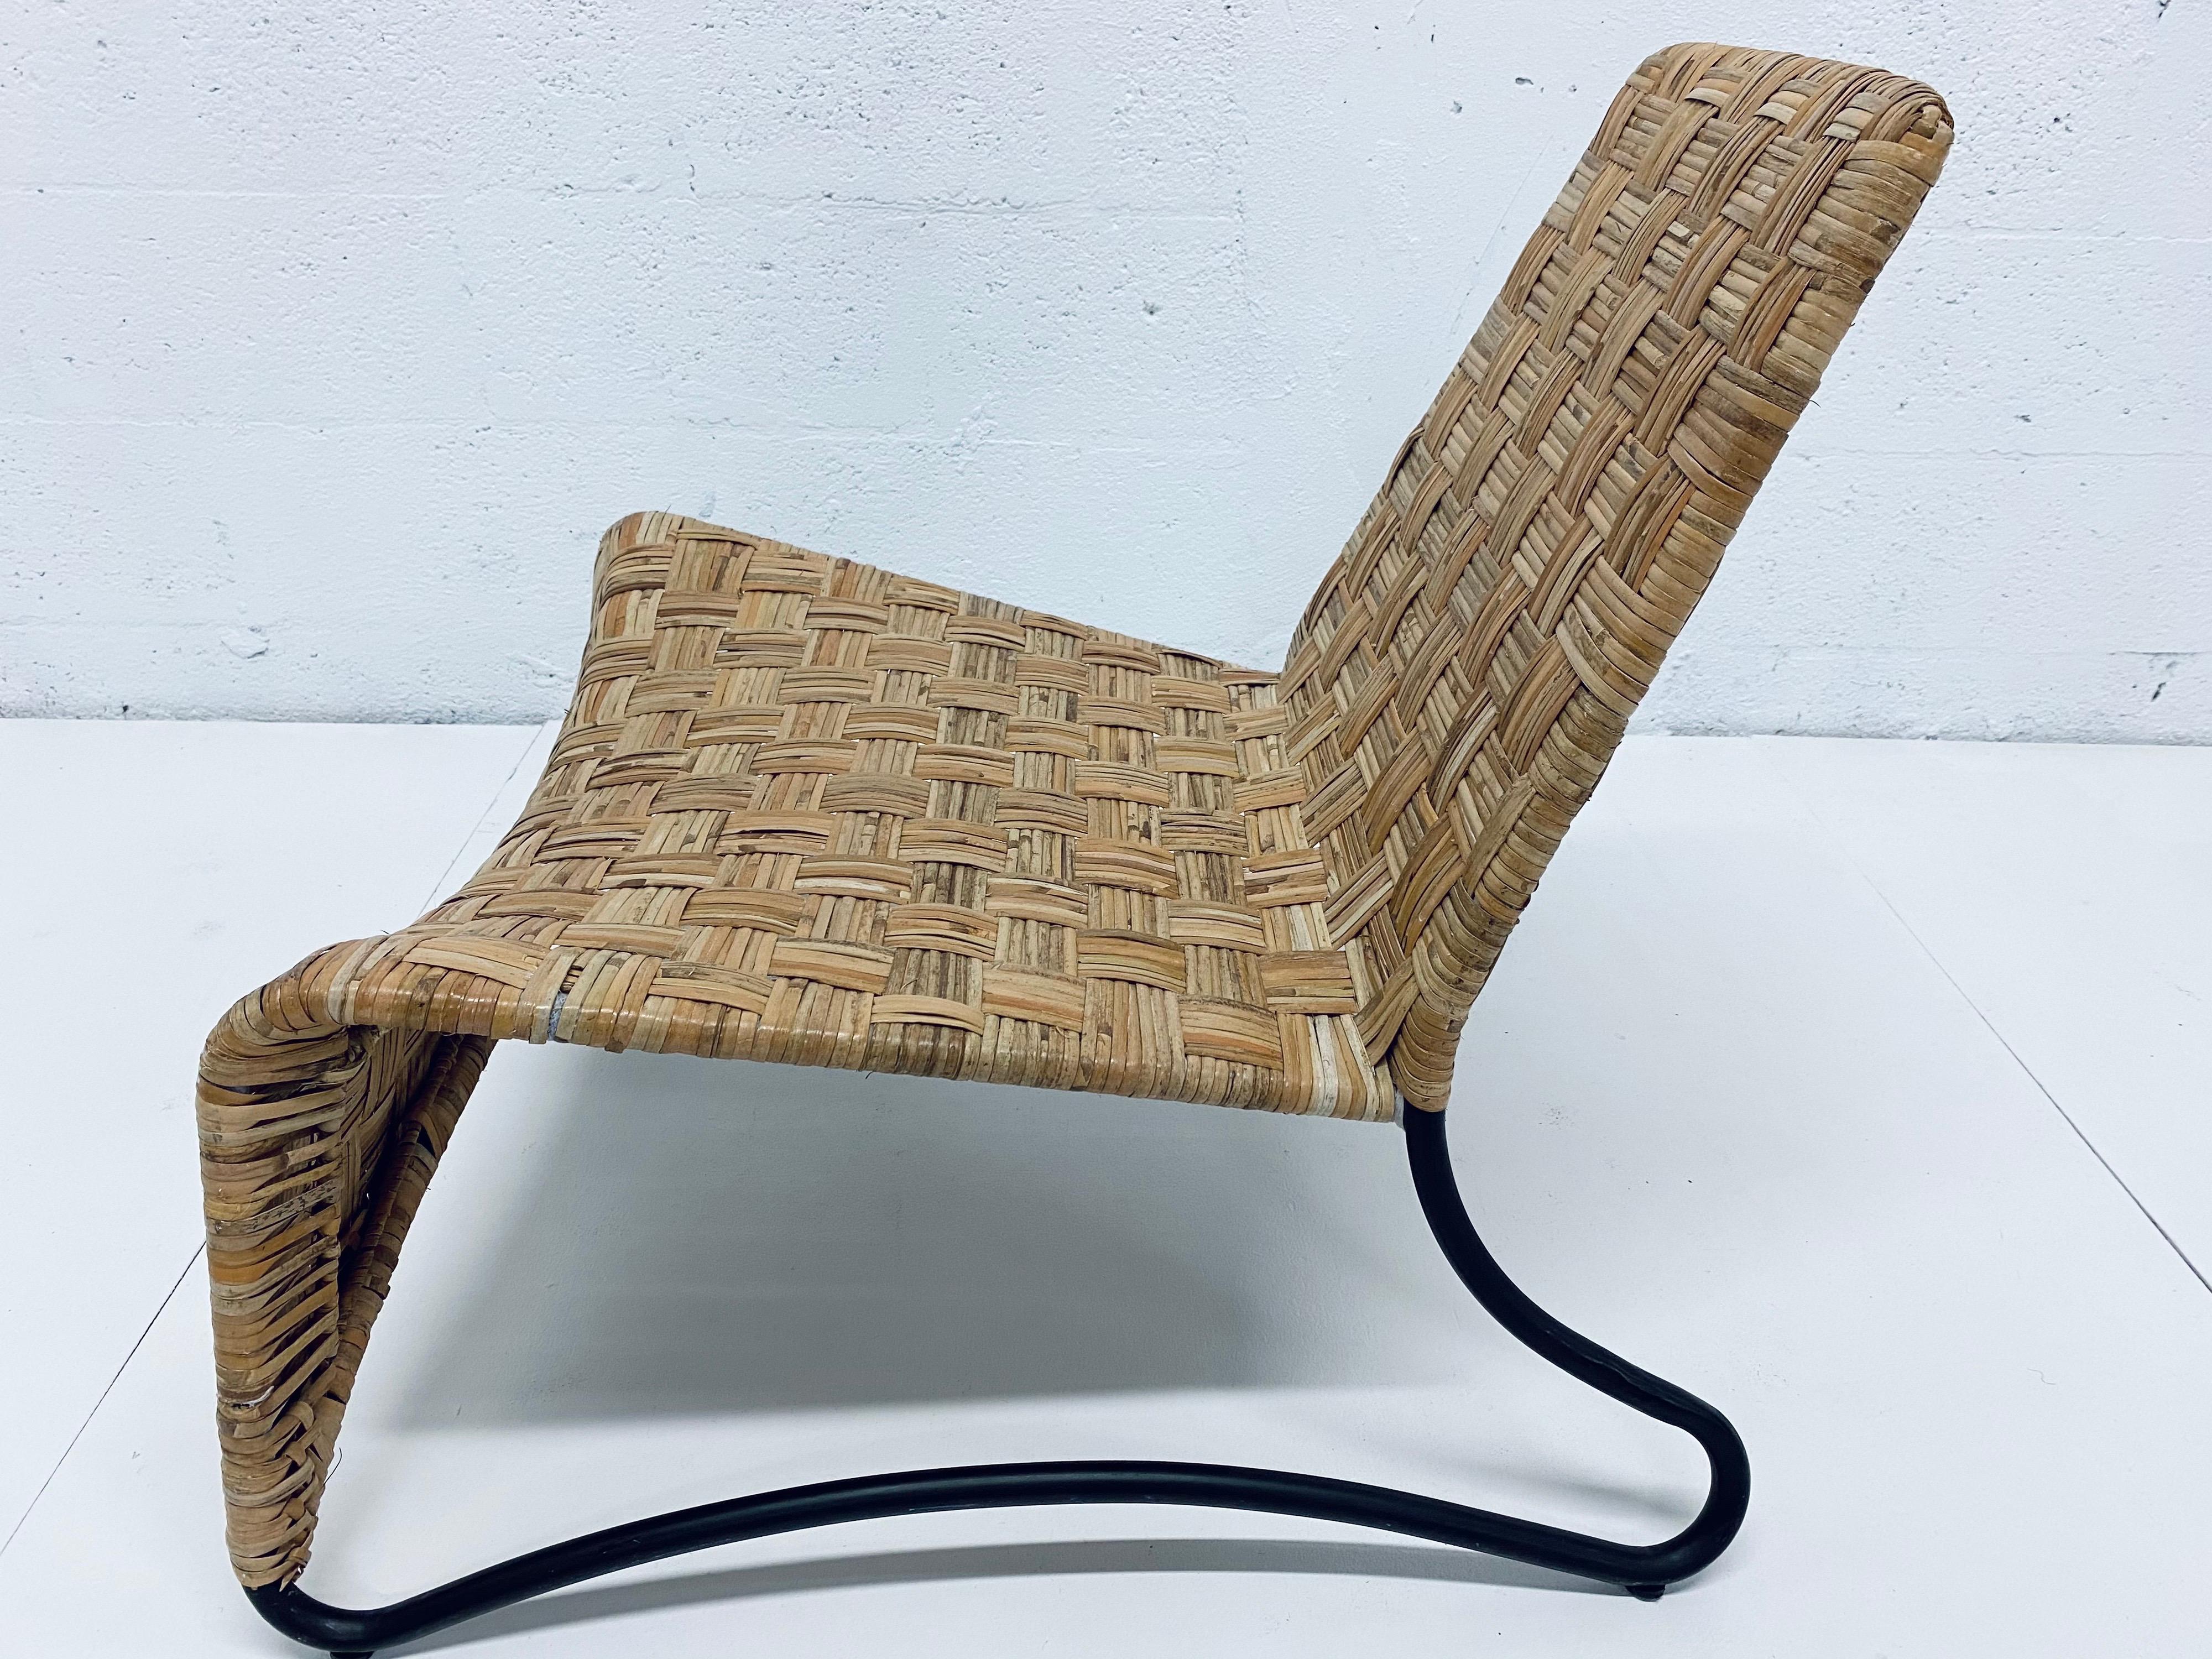 Steel Midcentury Woven Rattan Lounge Chair with Black Tubular Frame